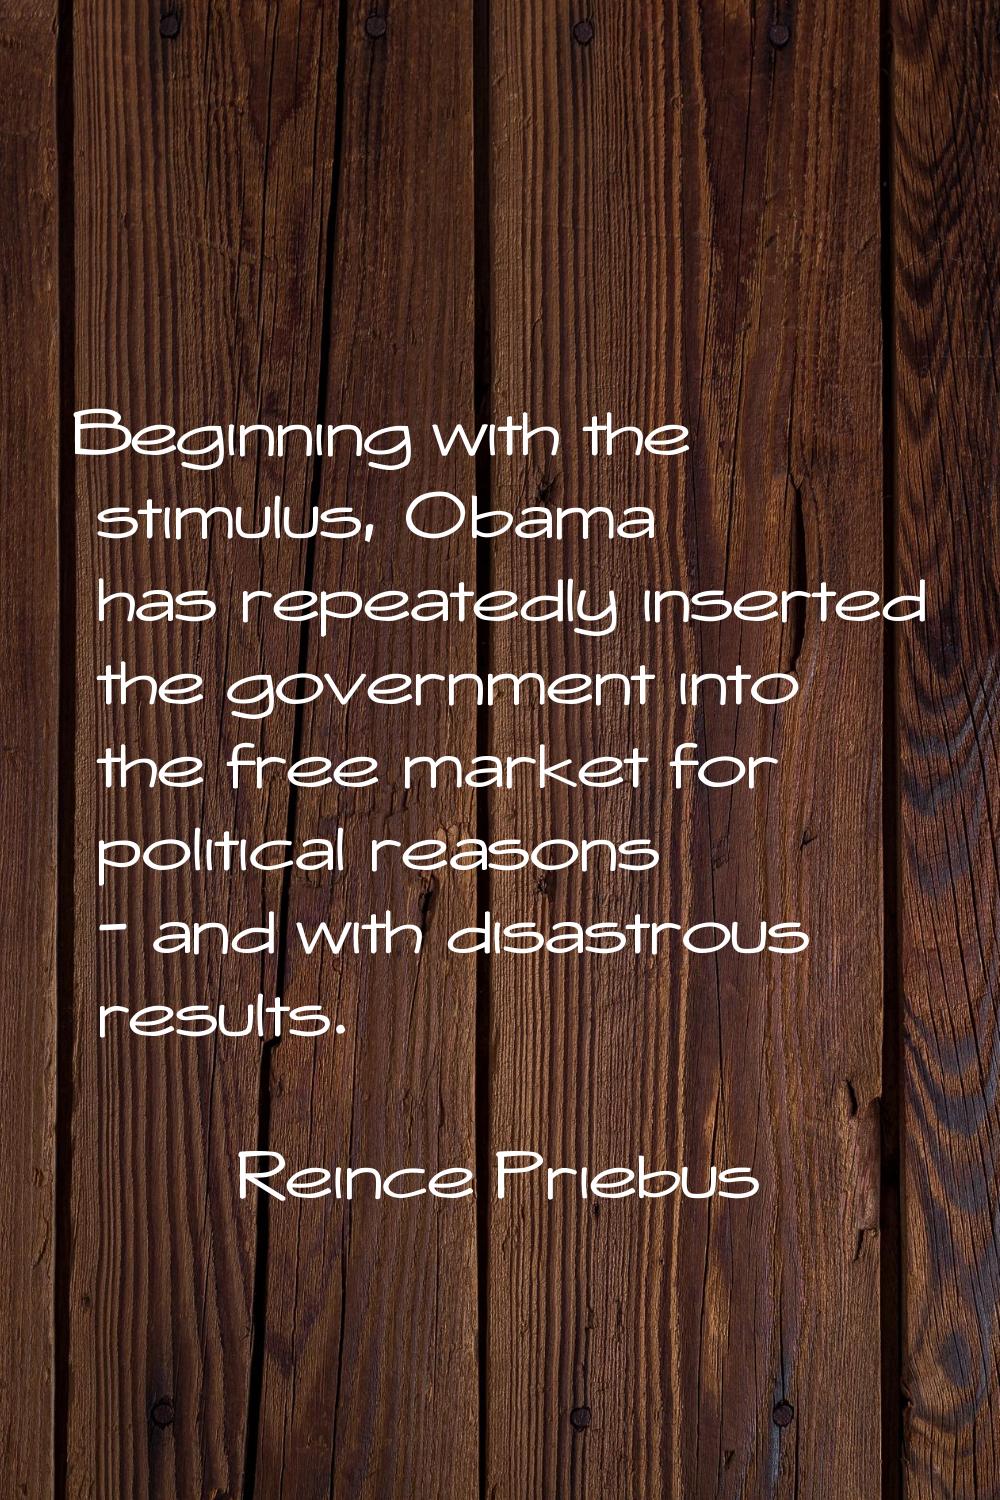 Beginning with the stimulus, Obama has repeatedly inserted the government into the free market for 